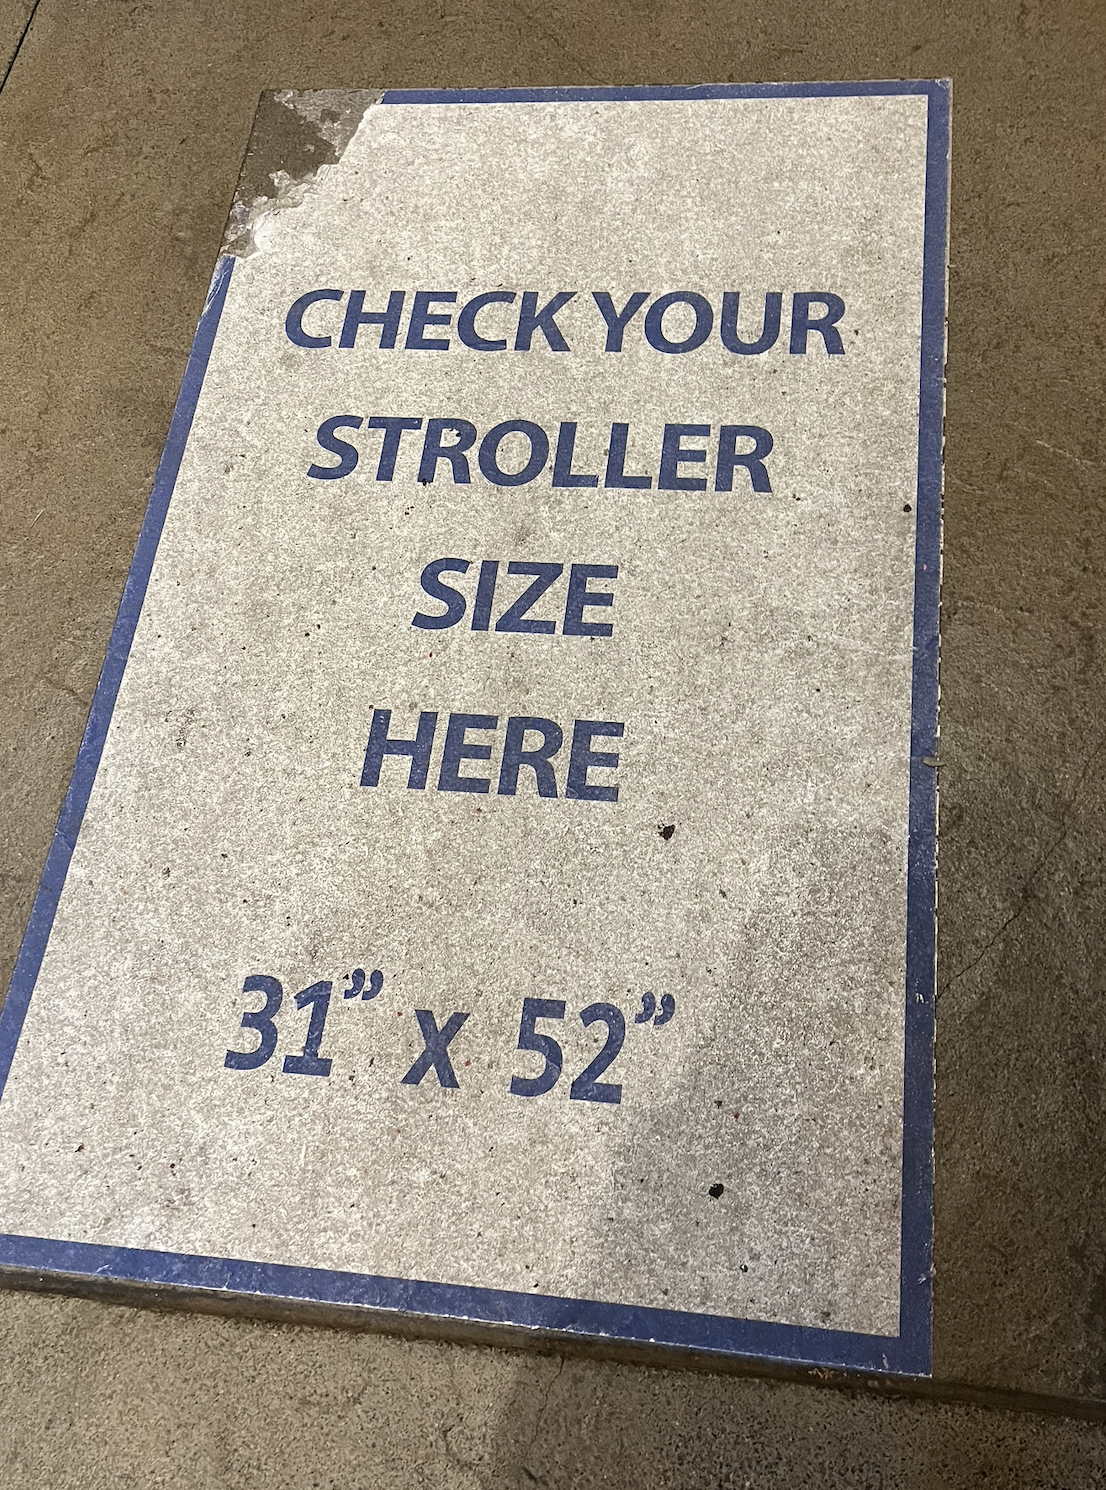 A photo of measurements of how big a stroller can be for Disneyland.